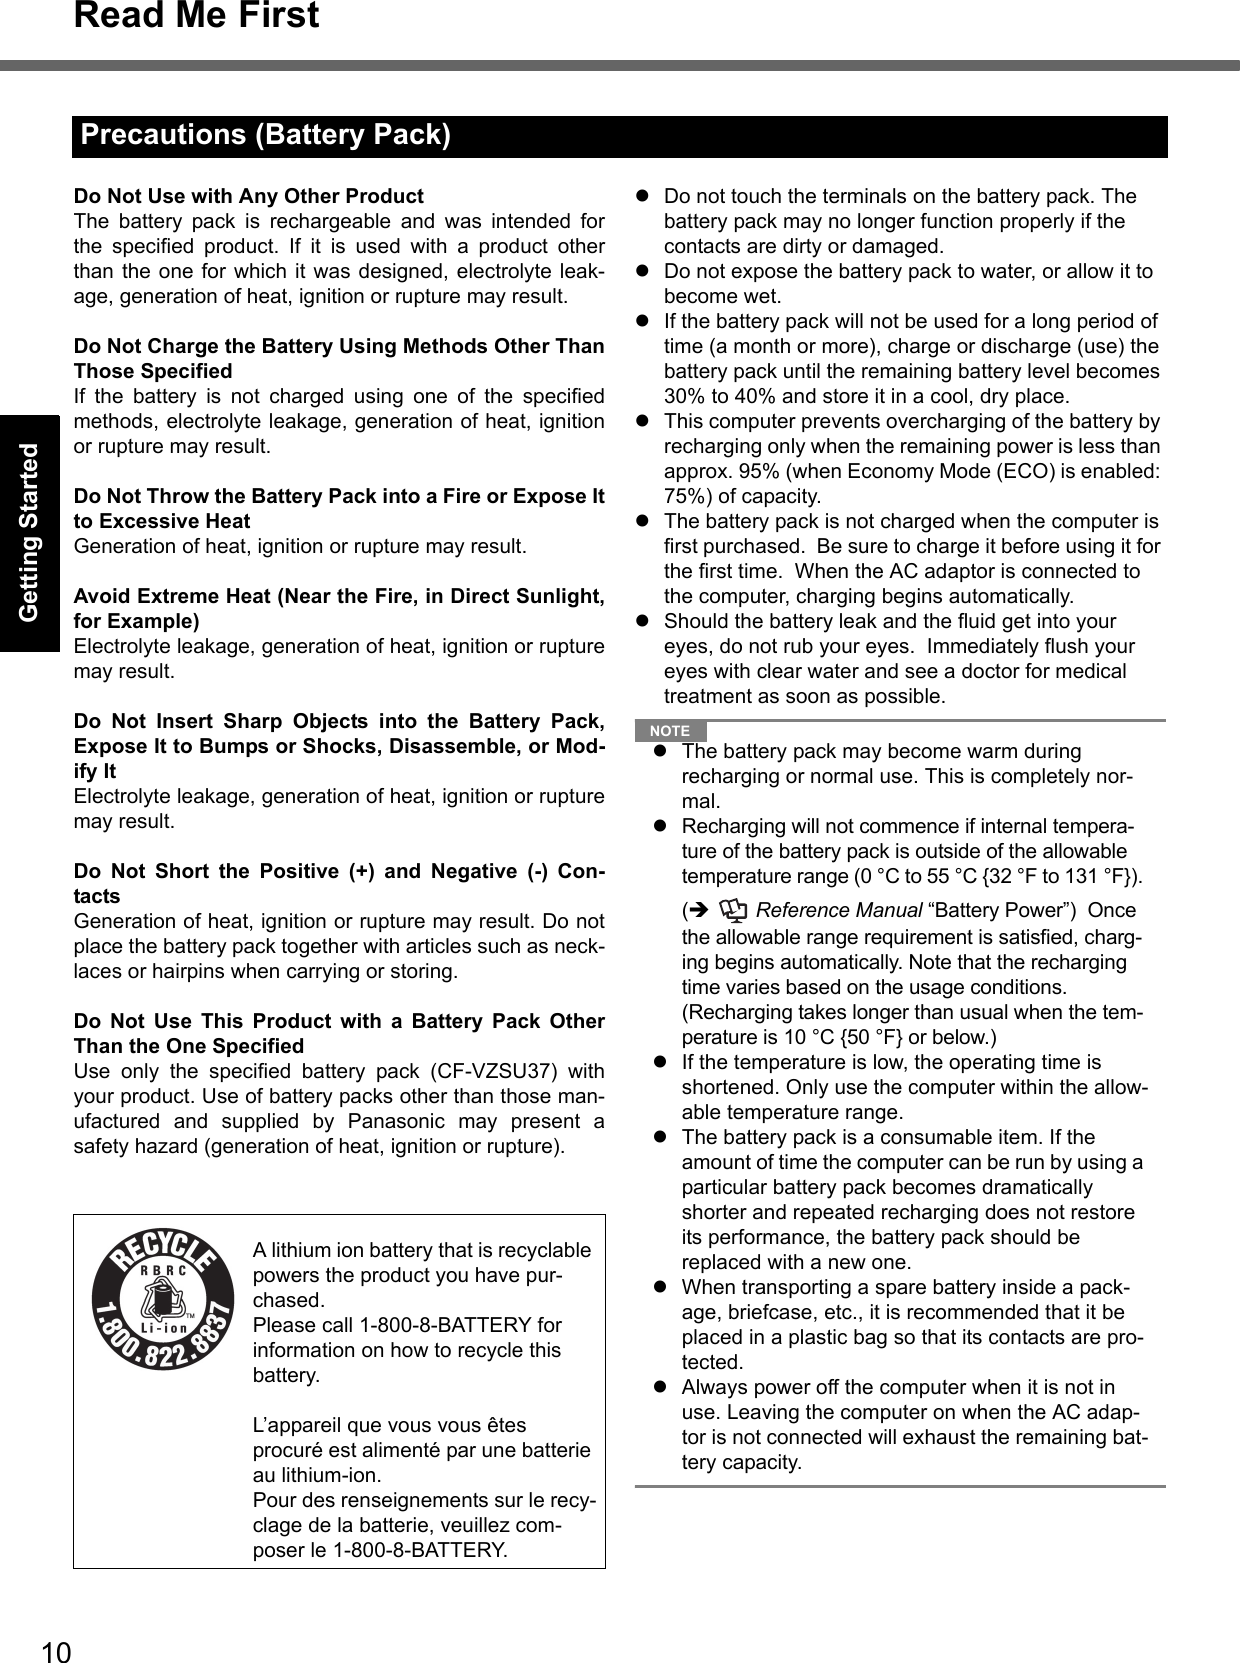 10Read Me FirstGetting StartedUseful InformationTroubleshootingAppendixDo Not Use with Any Other ProductThe battery pack is rechargeable and was intended forthe specified product. If it is used with a product otherthan the one for which it was designed, electrolyte leak-age, generation of heat, ignition or rupture may result.Do Not Charge the Battery Using Methods Other ThanThose SpecifiedIf the battery is not charged using one of the specifiedmethods, electrolyte leakage, generation of heat, ignitionor rupture may result.Do Not Throw the Battery Pack into a Fire or Expose Itto Excessive HeatGeneration of heat, ignition or rupture may result.Avoid Extreme Heat (Near the Fire, in Direct Sunlight,for Example)Electrolyte leakage, generation of heat, ignition or rupturemay result.Do Not Insert Sharp Objects into the Battery Pack,Expose It to Bumps or Shocks, Disassemble, or Mod-ify ItElectrolyte leakage, generation of heat, ignition or rupturemay result.Do Not Short the Positive (+) and Negative (-) Con-tactsGeneration of heat, ignition or rupture may result. Do notplace the battery pack together with articles such as neck-laces or hairpins when carrying or storing.Do Not Use This Product with a Battery Pack OtherThan the One SpecifiedUse only the specified battery pack (CF-VZSU37) withyour product. Use of battery packs other than those man-ufactured and supplied by Panasonic may present asafety hazard (generation of heat, ignition or rupture).Do not touch the terminals on the battery pack. The battery pack may no longer function properly if the contacts are dirty or damaged.Do not expose the battery pack to water, or allow it to become wet.If the battery pack will not be used for a long period of time (a month or more), charge or discharge (use) the battery pack until the remaining battery level becomes 30% to 40% and store it in a cool, dry place.This computer prevents overcharging of the battery by recharging only when the remaining power is less than approx. 95% (when Economy Mode (ECO) is enabled: 75%) of capacity.The battery pack is not charged when the computer is first purchased.  Be sure to charge it before using it for the first time.  When the AC adaptor is connected to the computer, charging begins automatically.Should the battery leak and the fluid get into your eyes, do not rub your eyes.  Immediately flush your eyes with clear water and see a doctor for medical treatment as soon as possible.NOTEThe battery pack may become warm during recharging or normal use. This is completely nor-mal.Recharging will not commence if internal tempera-ture of the battery pack is outside of the allowable temperature range (0 °C to 55 °C {32 °F to 131 °F}). (  Reference Manual “Battery Power”)  Once the allowable range requirement is satisfied, charg-ing begins automatically. Note that the recharging time varies based on the usage conditions. (Recharging takes longer than usual when the tem-perature is 10 °C {50 °F} or below.)If the temperature is low, the operating time is shortened. Only use the computer within the allow-able temperature range.The battery pack is a consumable item. If the amount of time the computer can be run by using a particular battery pack becomes dramatically shorter and repeated recharging does not restore its performance, the battery pack should be replaced with a new one.  When transporting a spare battery inside a pack-age, briefcase, etc., it is recommended that it be placed in a plastic bag so that its contacts are pro-tected.Always power off the computer when it is not in use. Leaving the computer on when the AC adap-tor is not connected will exhaust the remaining bat-tery capacity.Precautions (Battery Pack)A lithium ion battery that is recyclable powers the product you have pur-chased.Please call 1-800-8-BATTERY for information on how to recycle this battery.L’appareil que vous vous êtes procuré est alimenté par une batterie au lithium-ion.Pour des renseignements sur le recy-clage de la batterie, veuillez com-poser le 1-800-8-BATTERY.